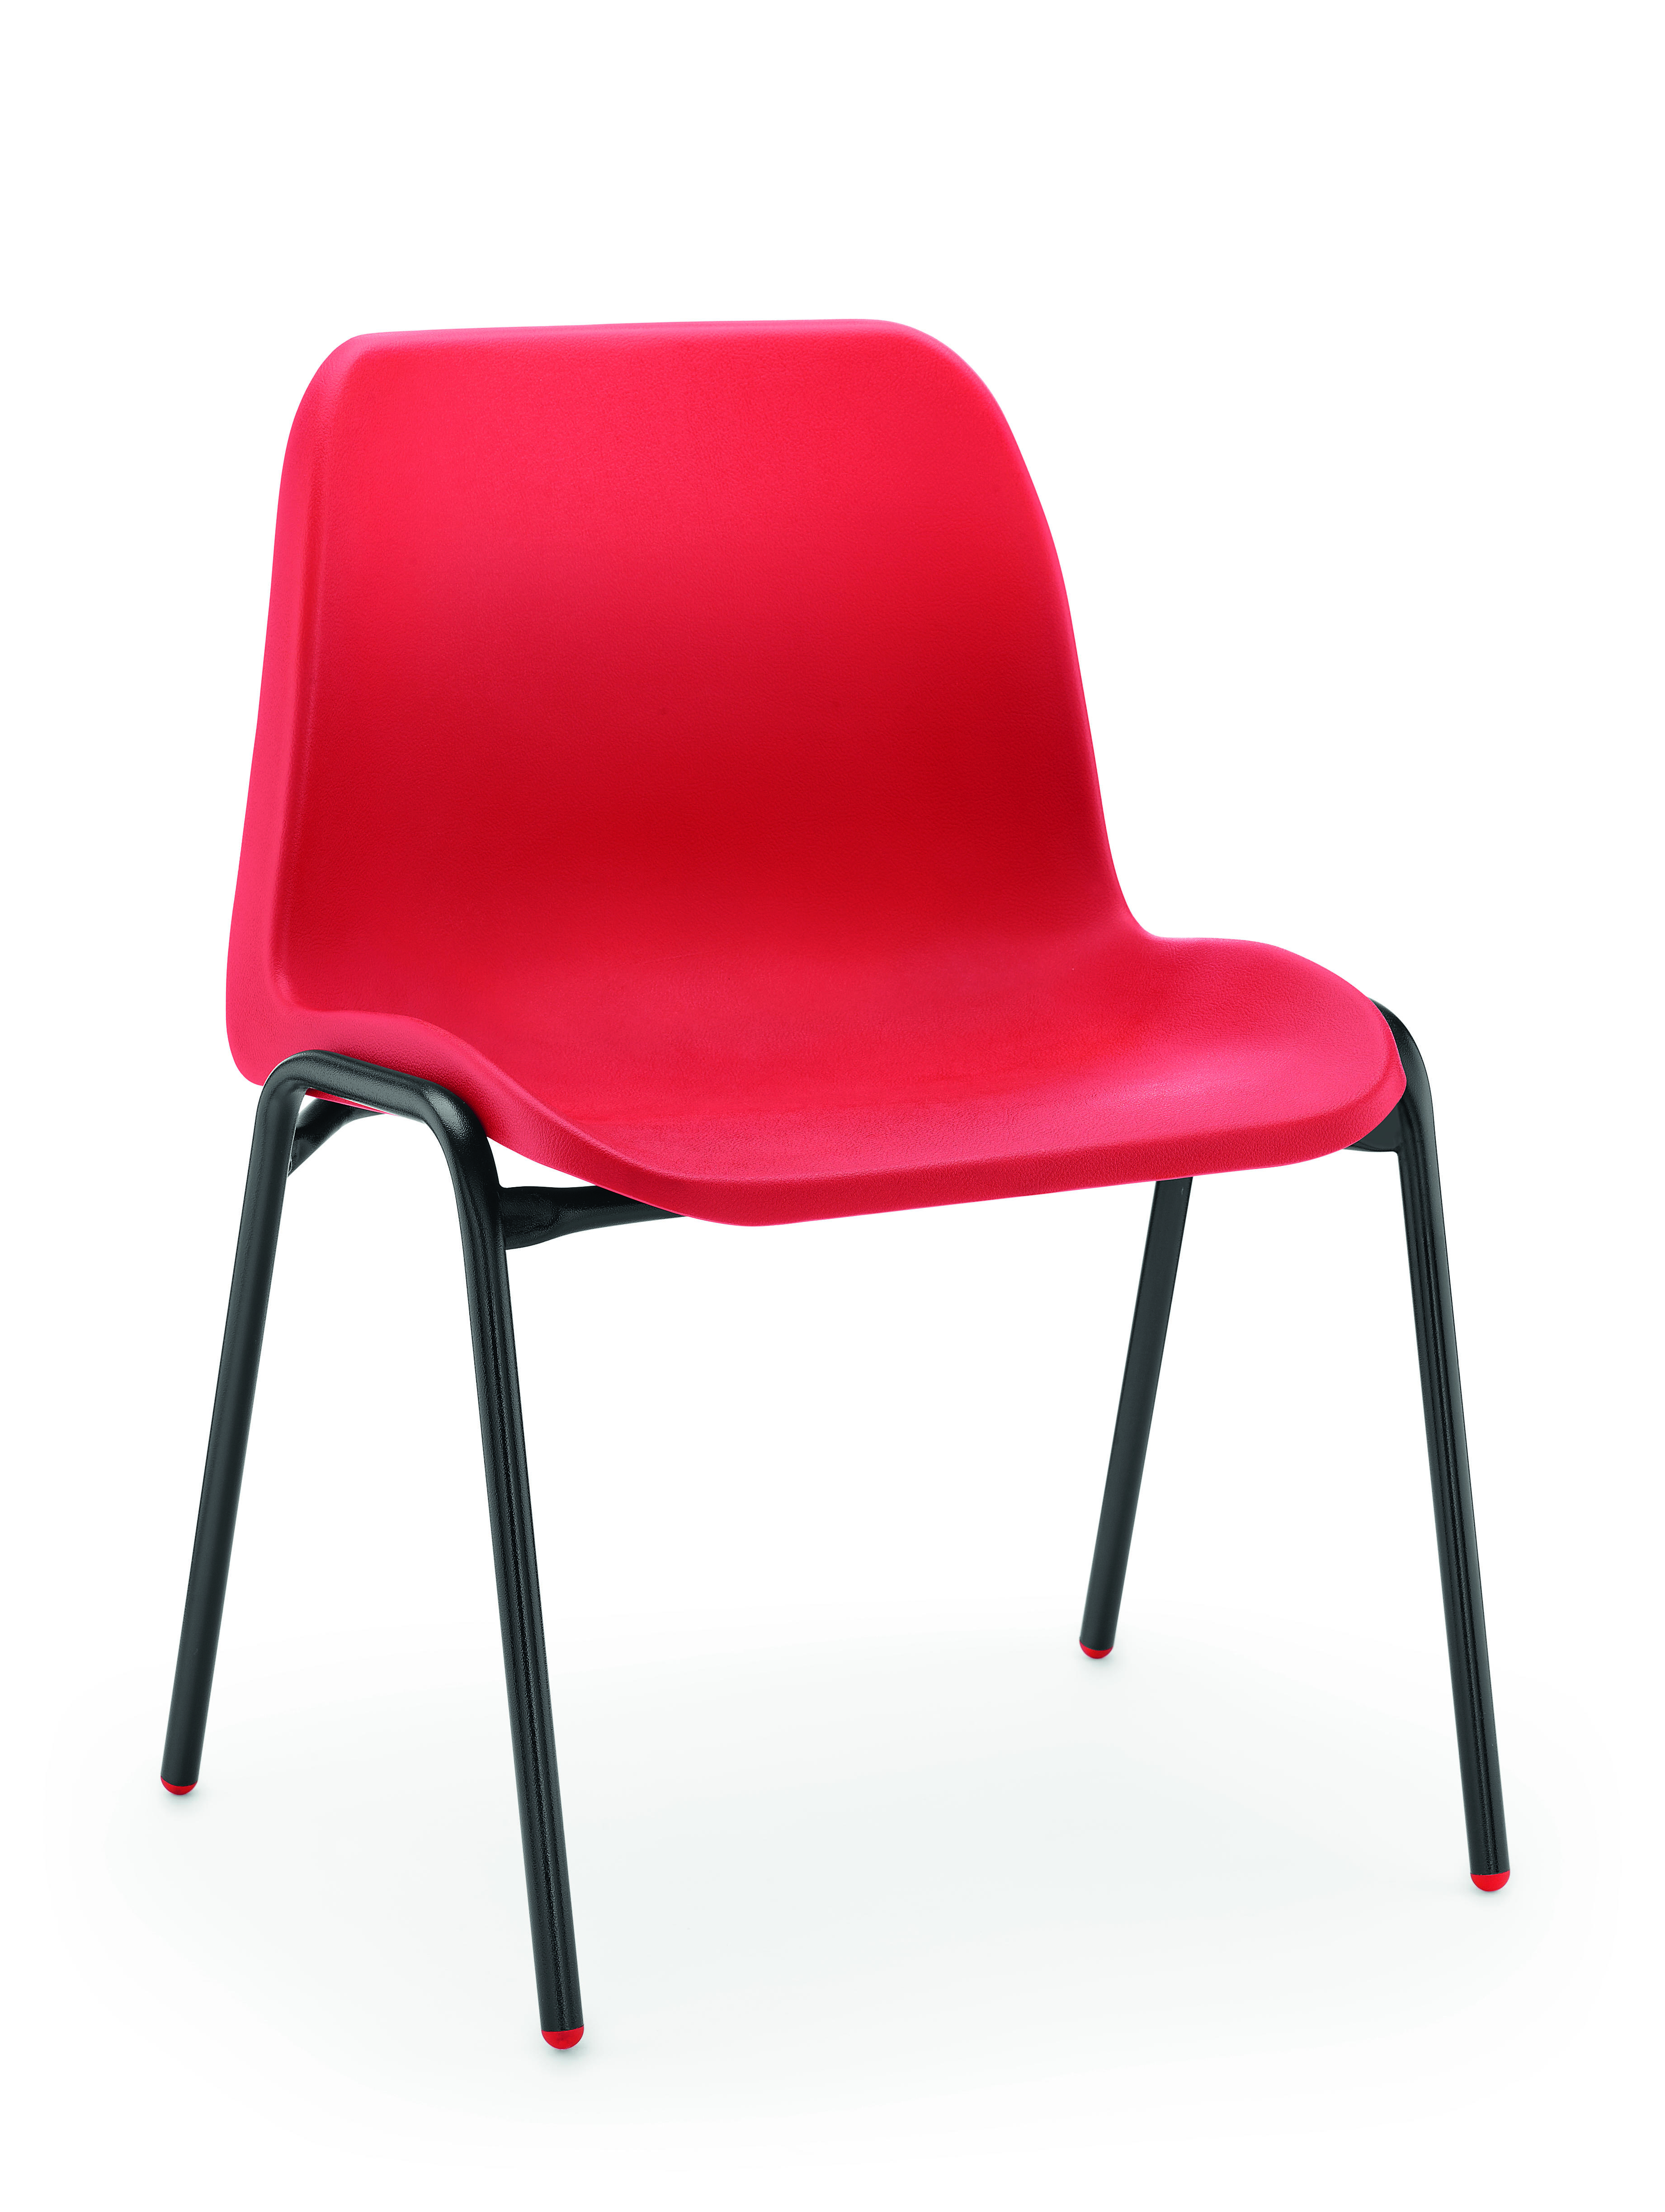 Classmates Chairs - Red - 6-8 years